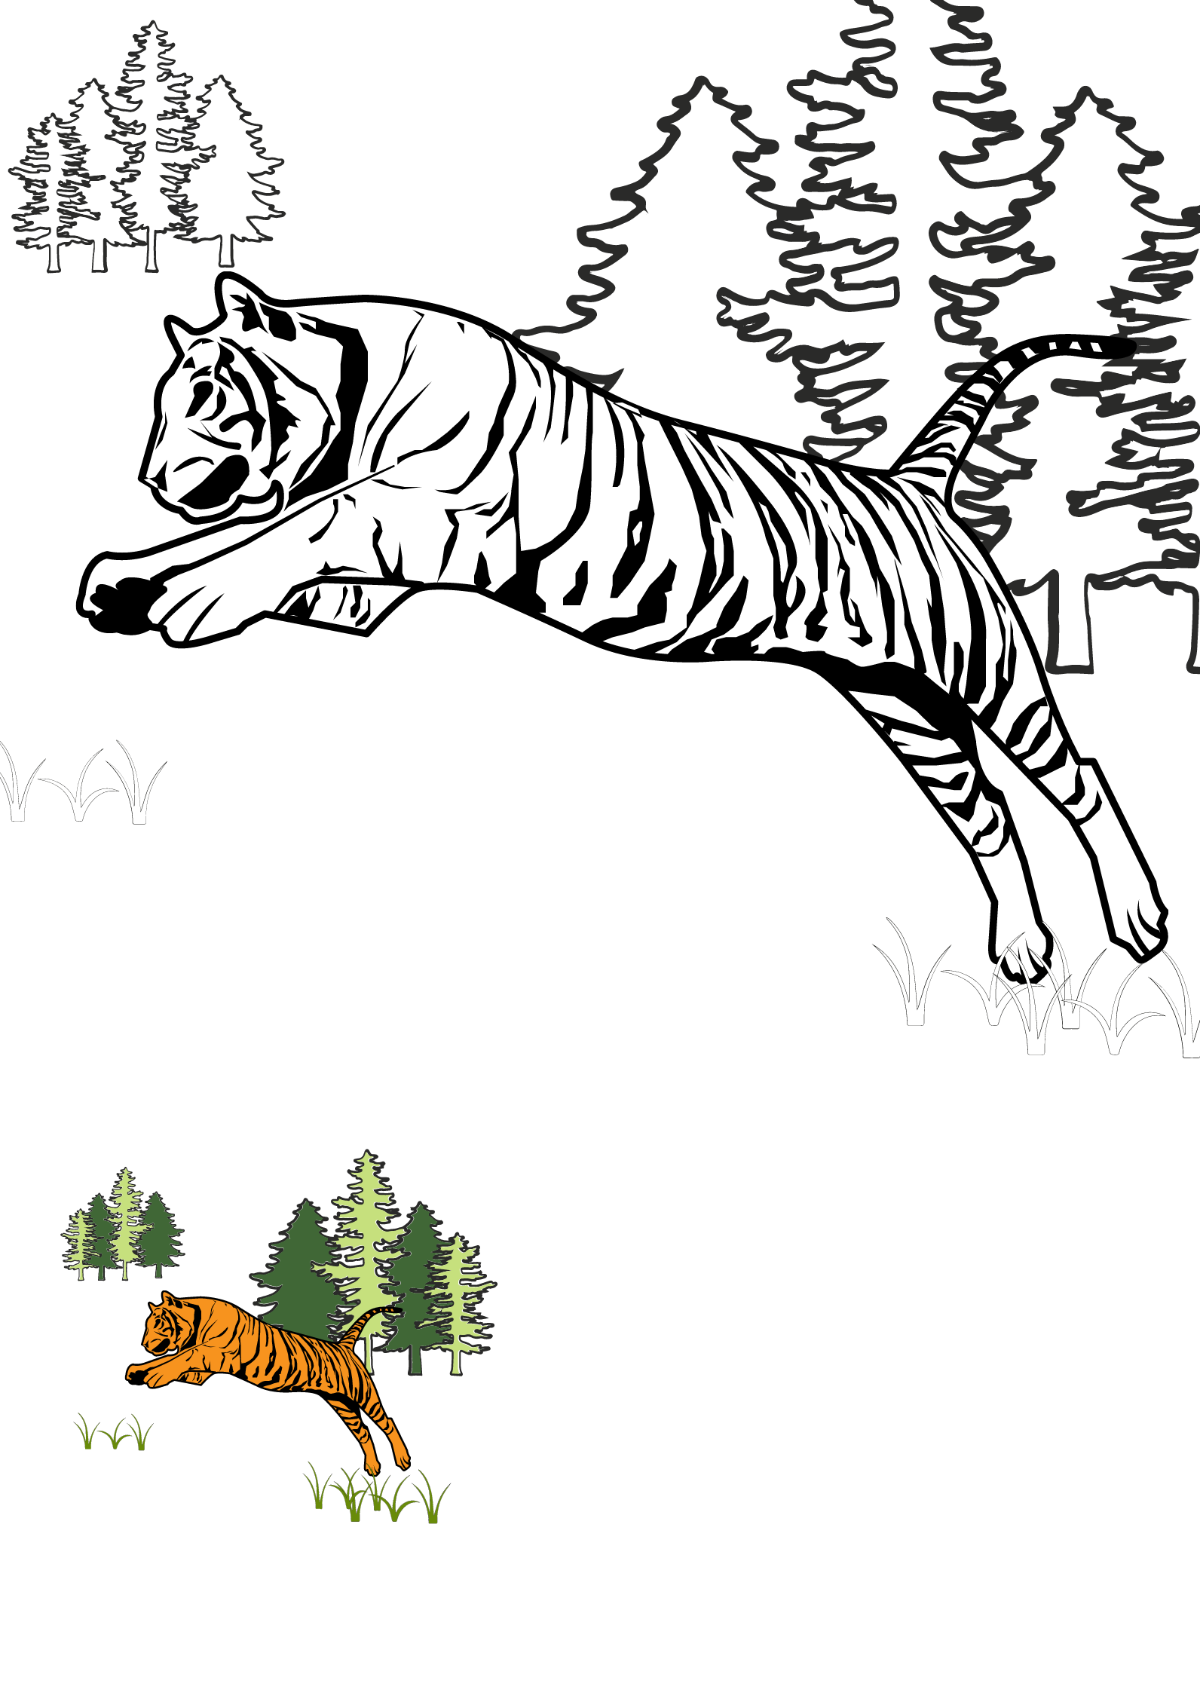 Tiger Full Body Coloring Page Template